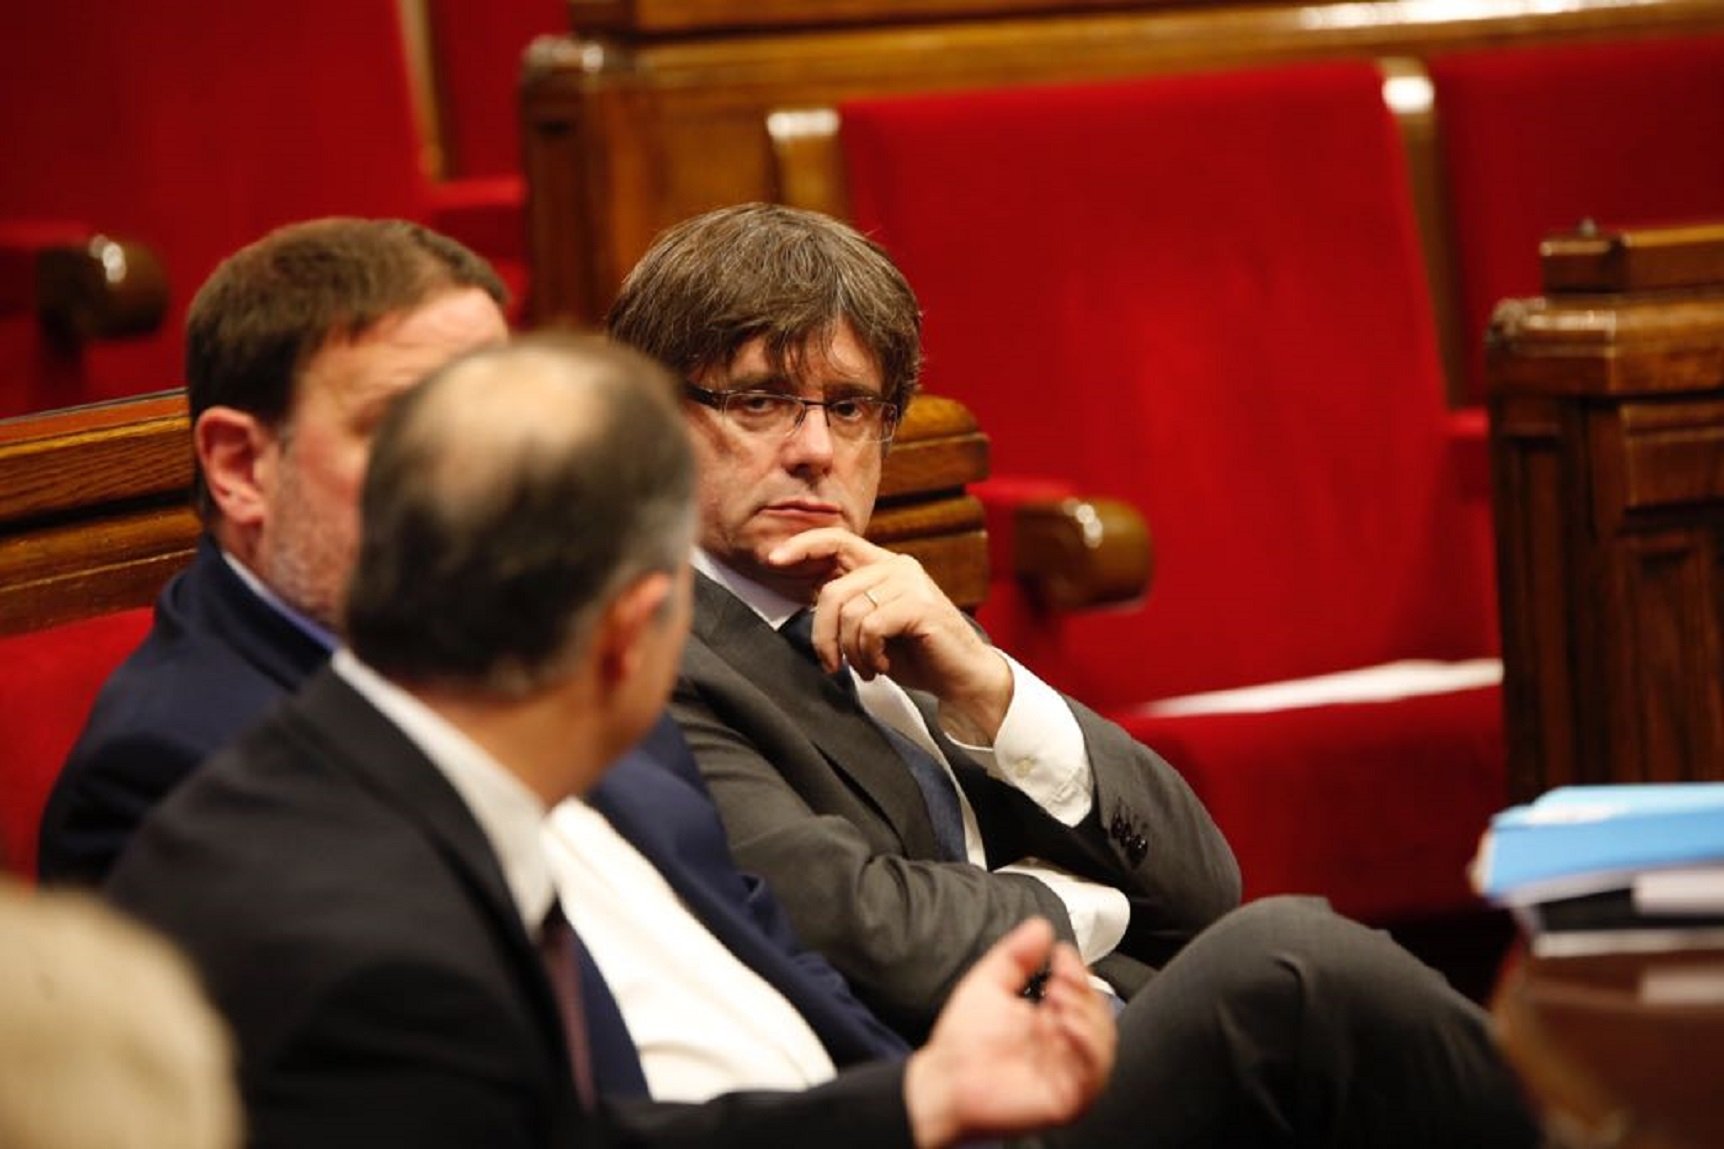 Catalan president accuses Spanish deputy PM of insulting and threatening Catalans